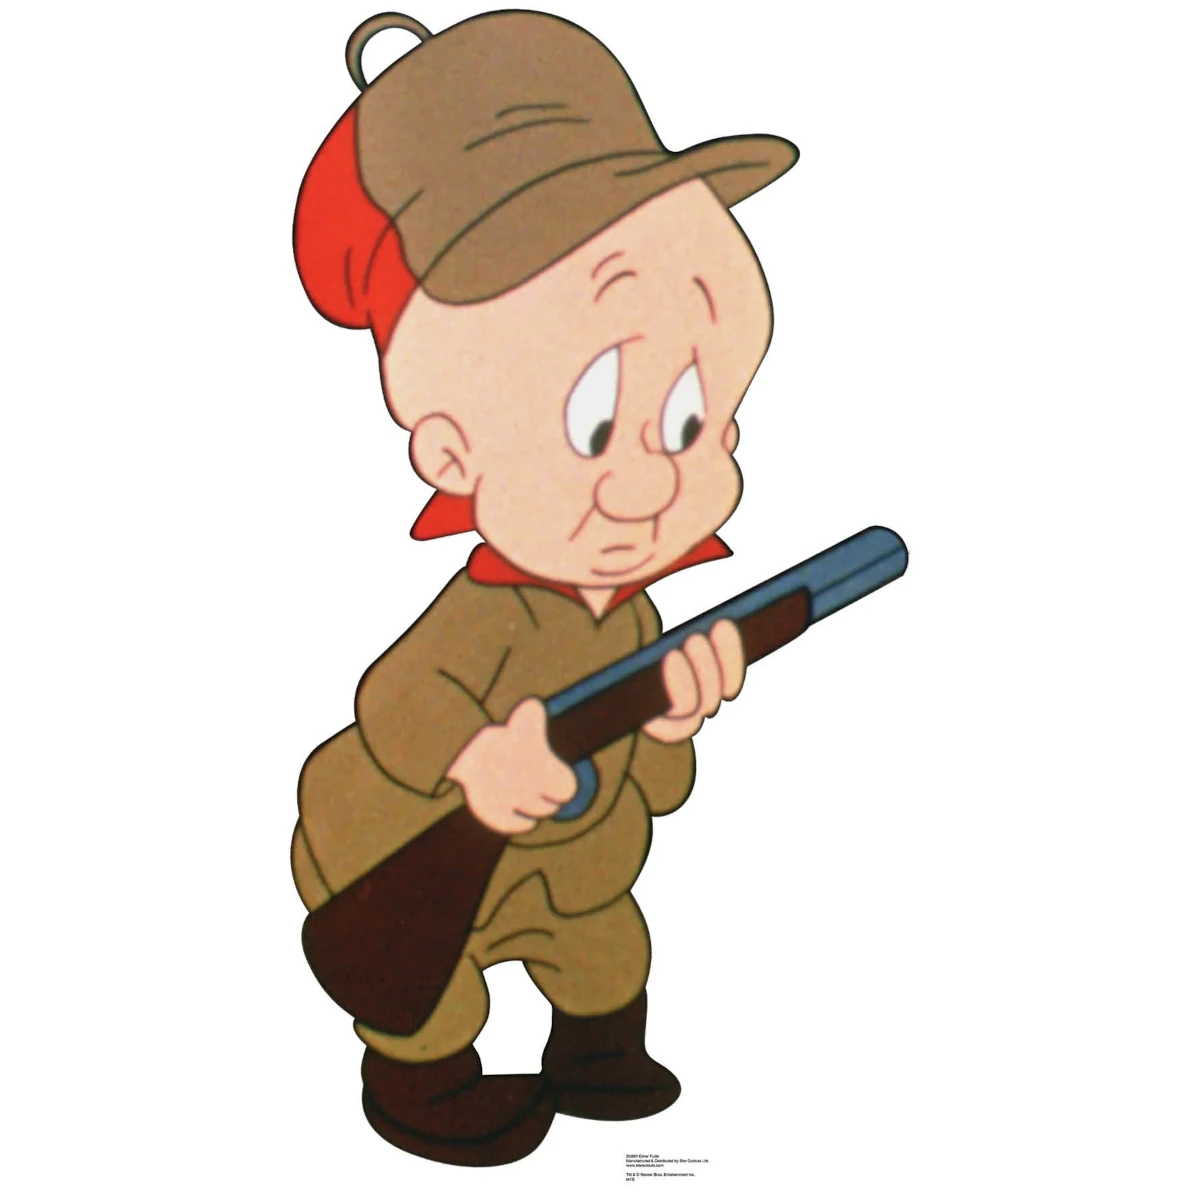 SC691 Elmer Fudd (Looney Tunes) Official Lifesize Cardboard Cutout Standee Front